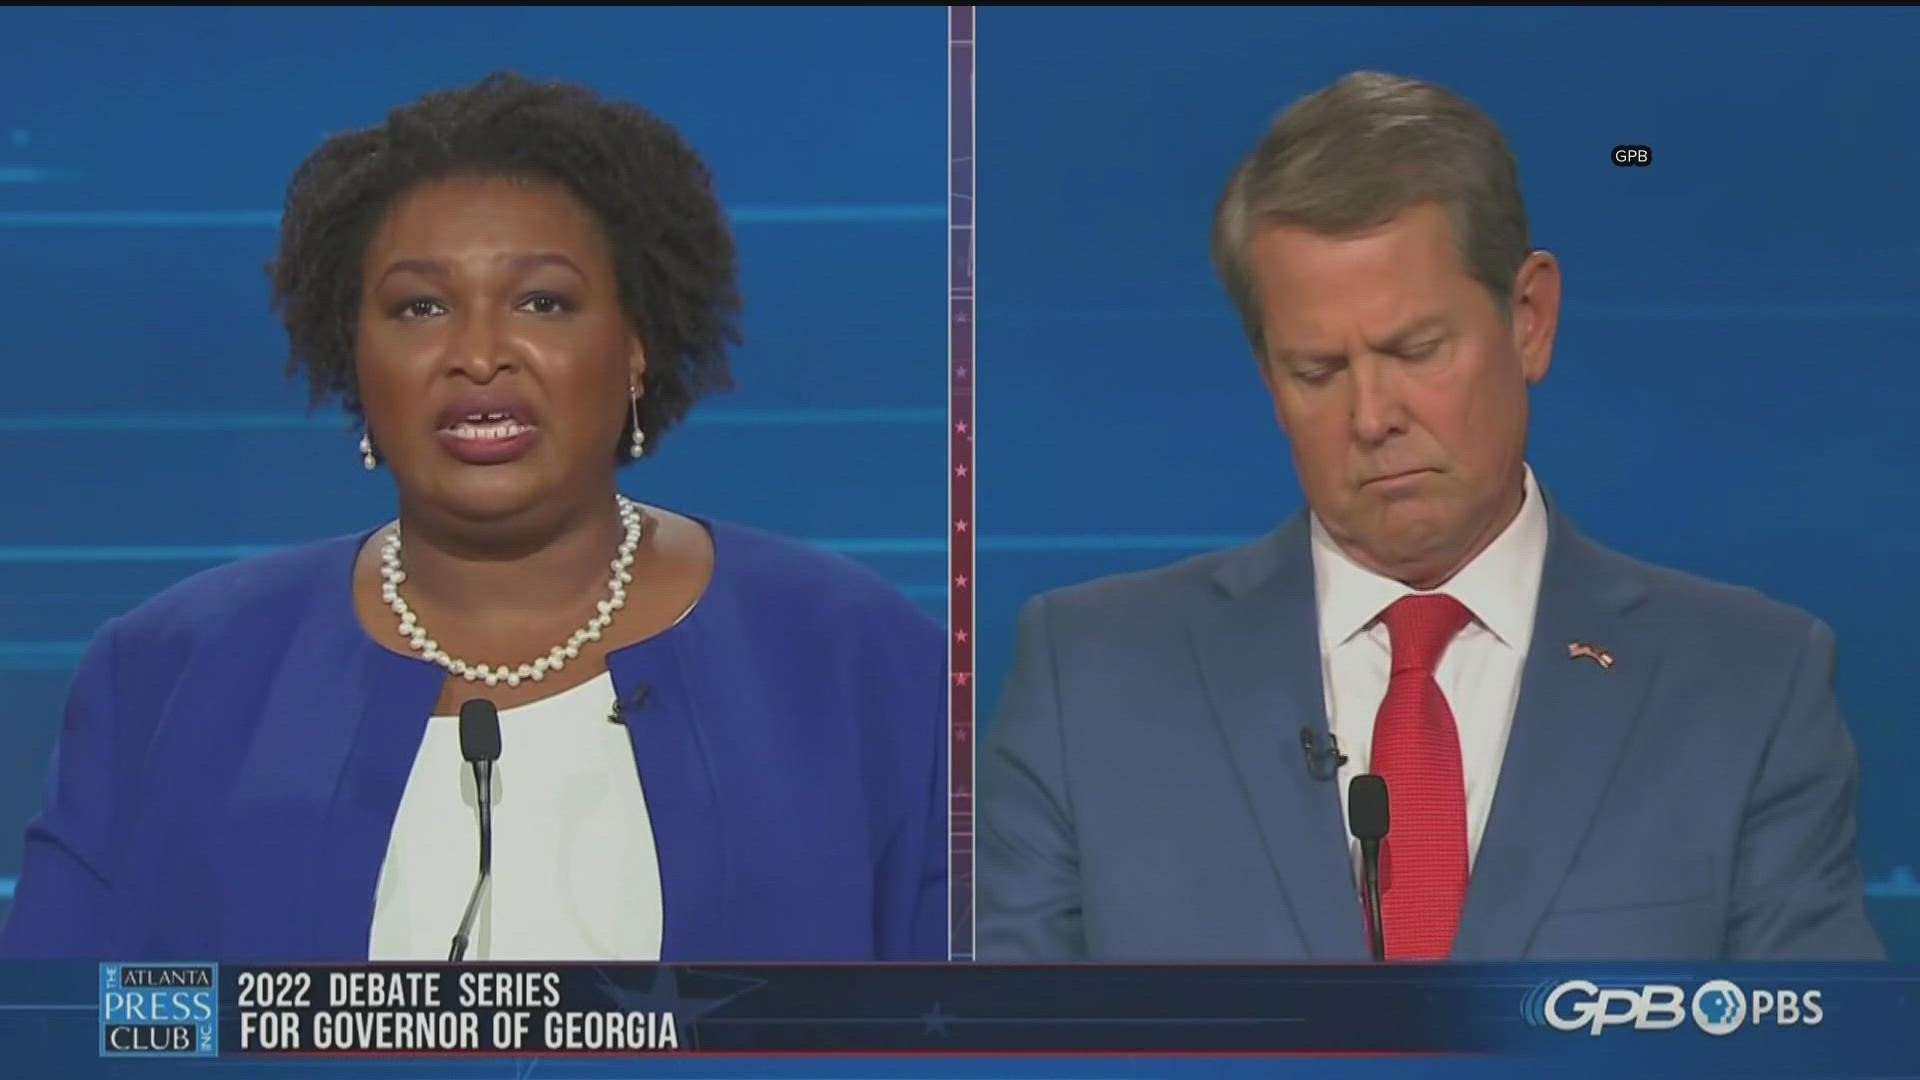 The three candidates in Georgia's gubernatorial election faced off in a debate Monday night ahead of the November election.